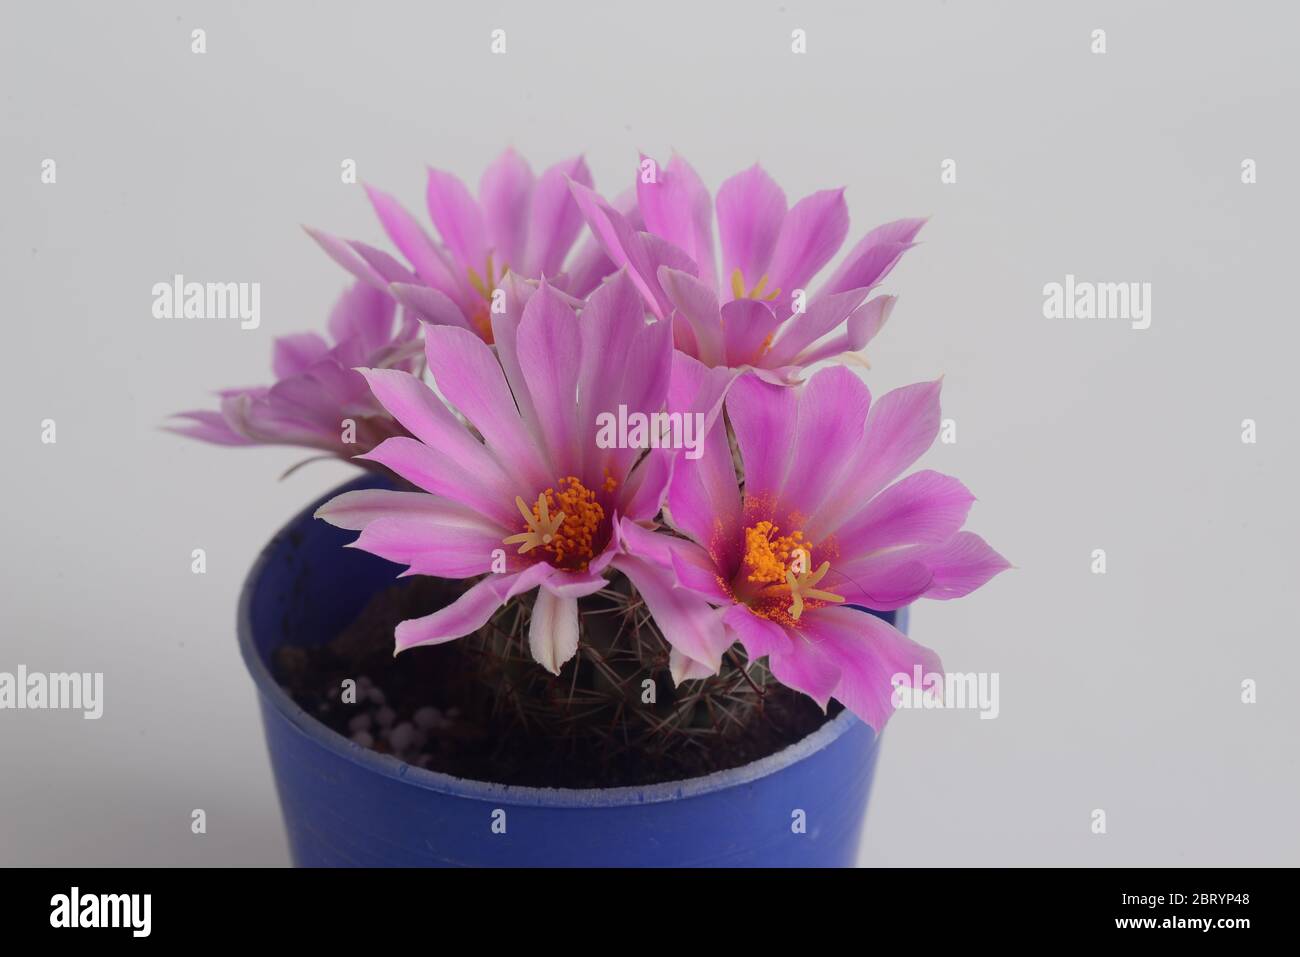 Blooming pink  flower of Mammillaria schumannii  cactus on  white  background with copy space for text Stock Photo